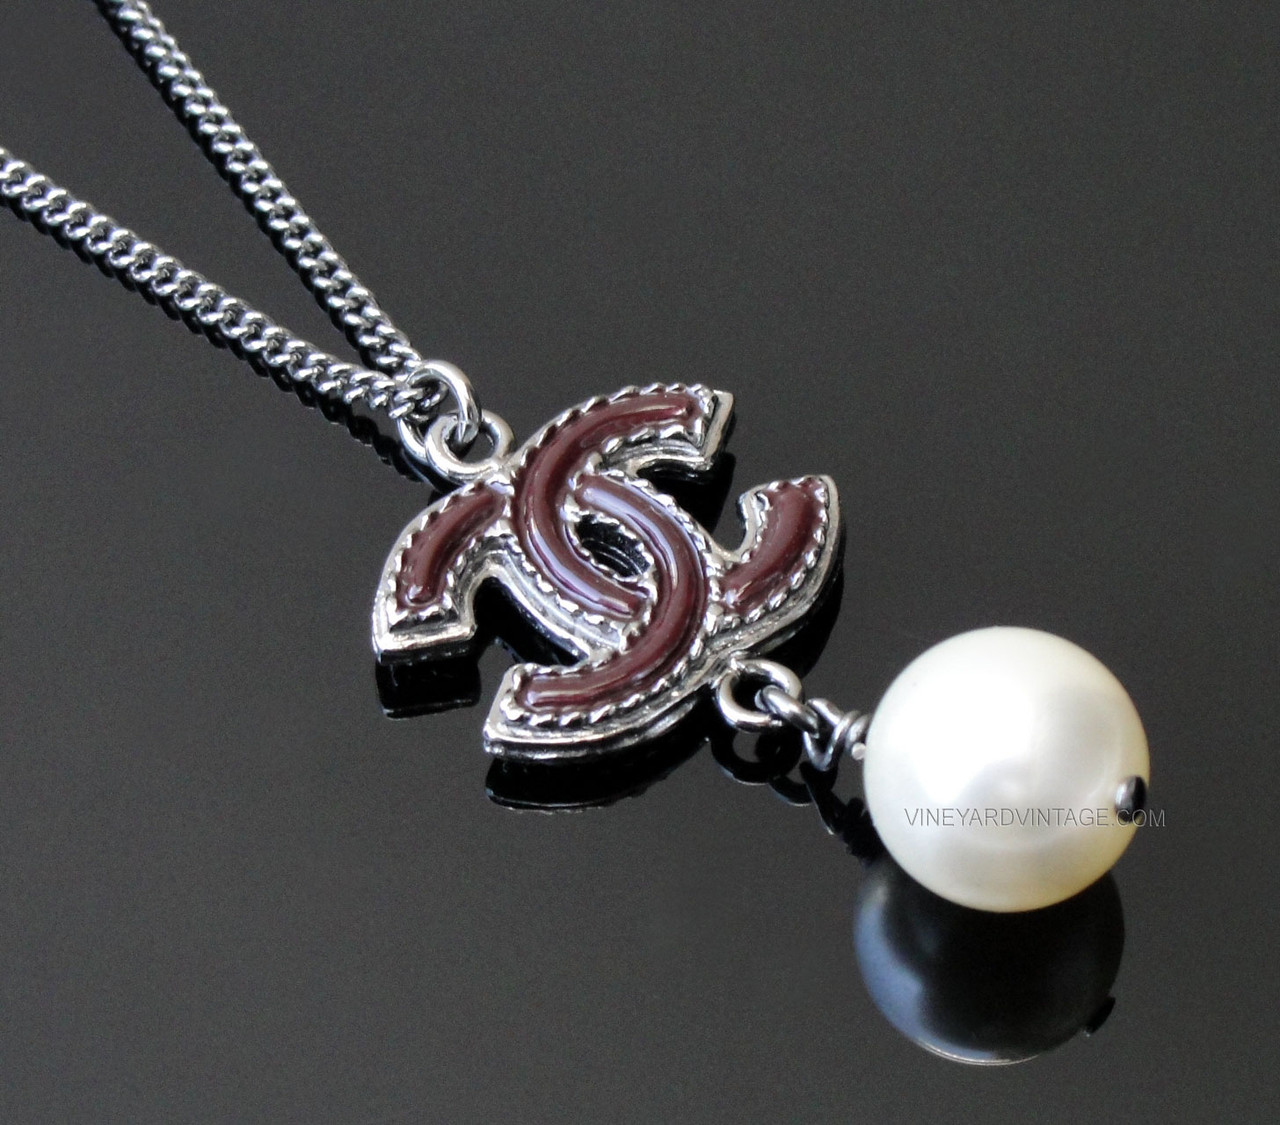 CHANEL BURGUNDY CC LOGO w/HANGING PEARL NECKLACE